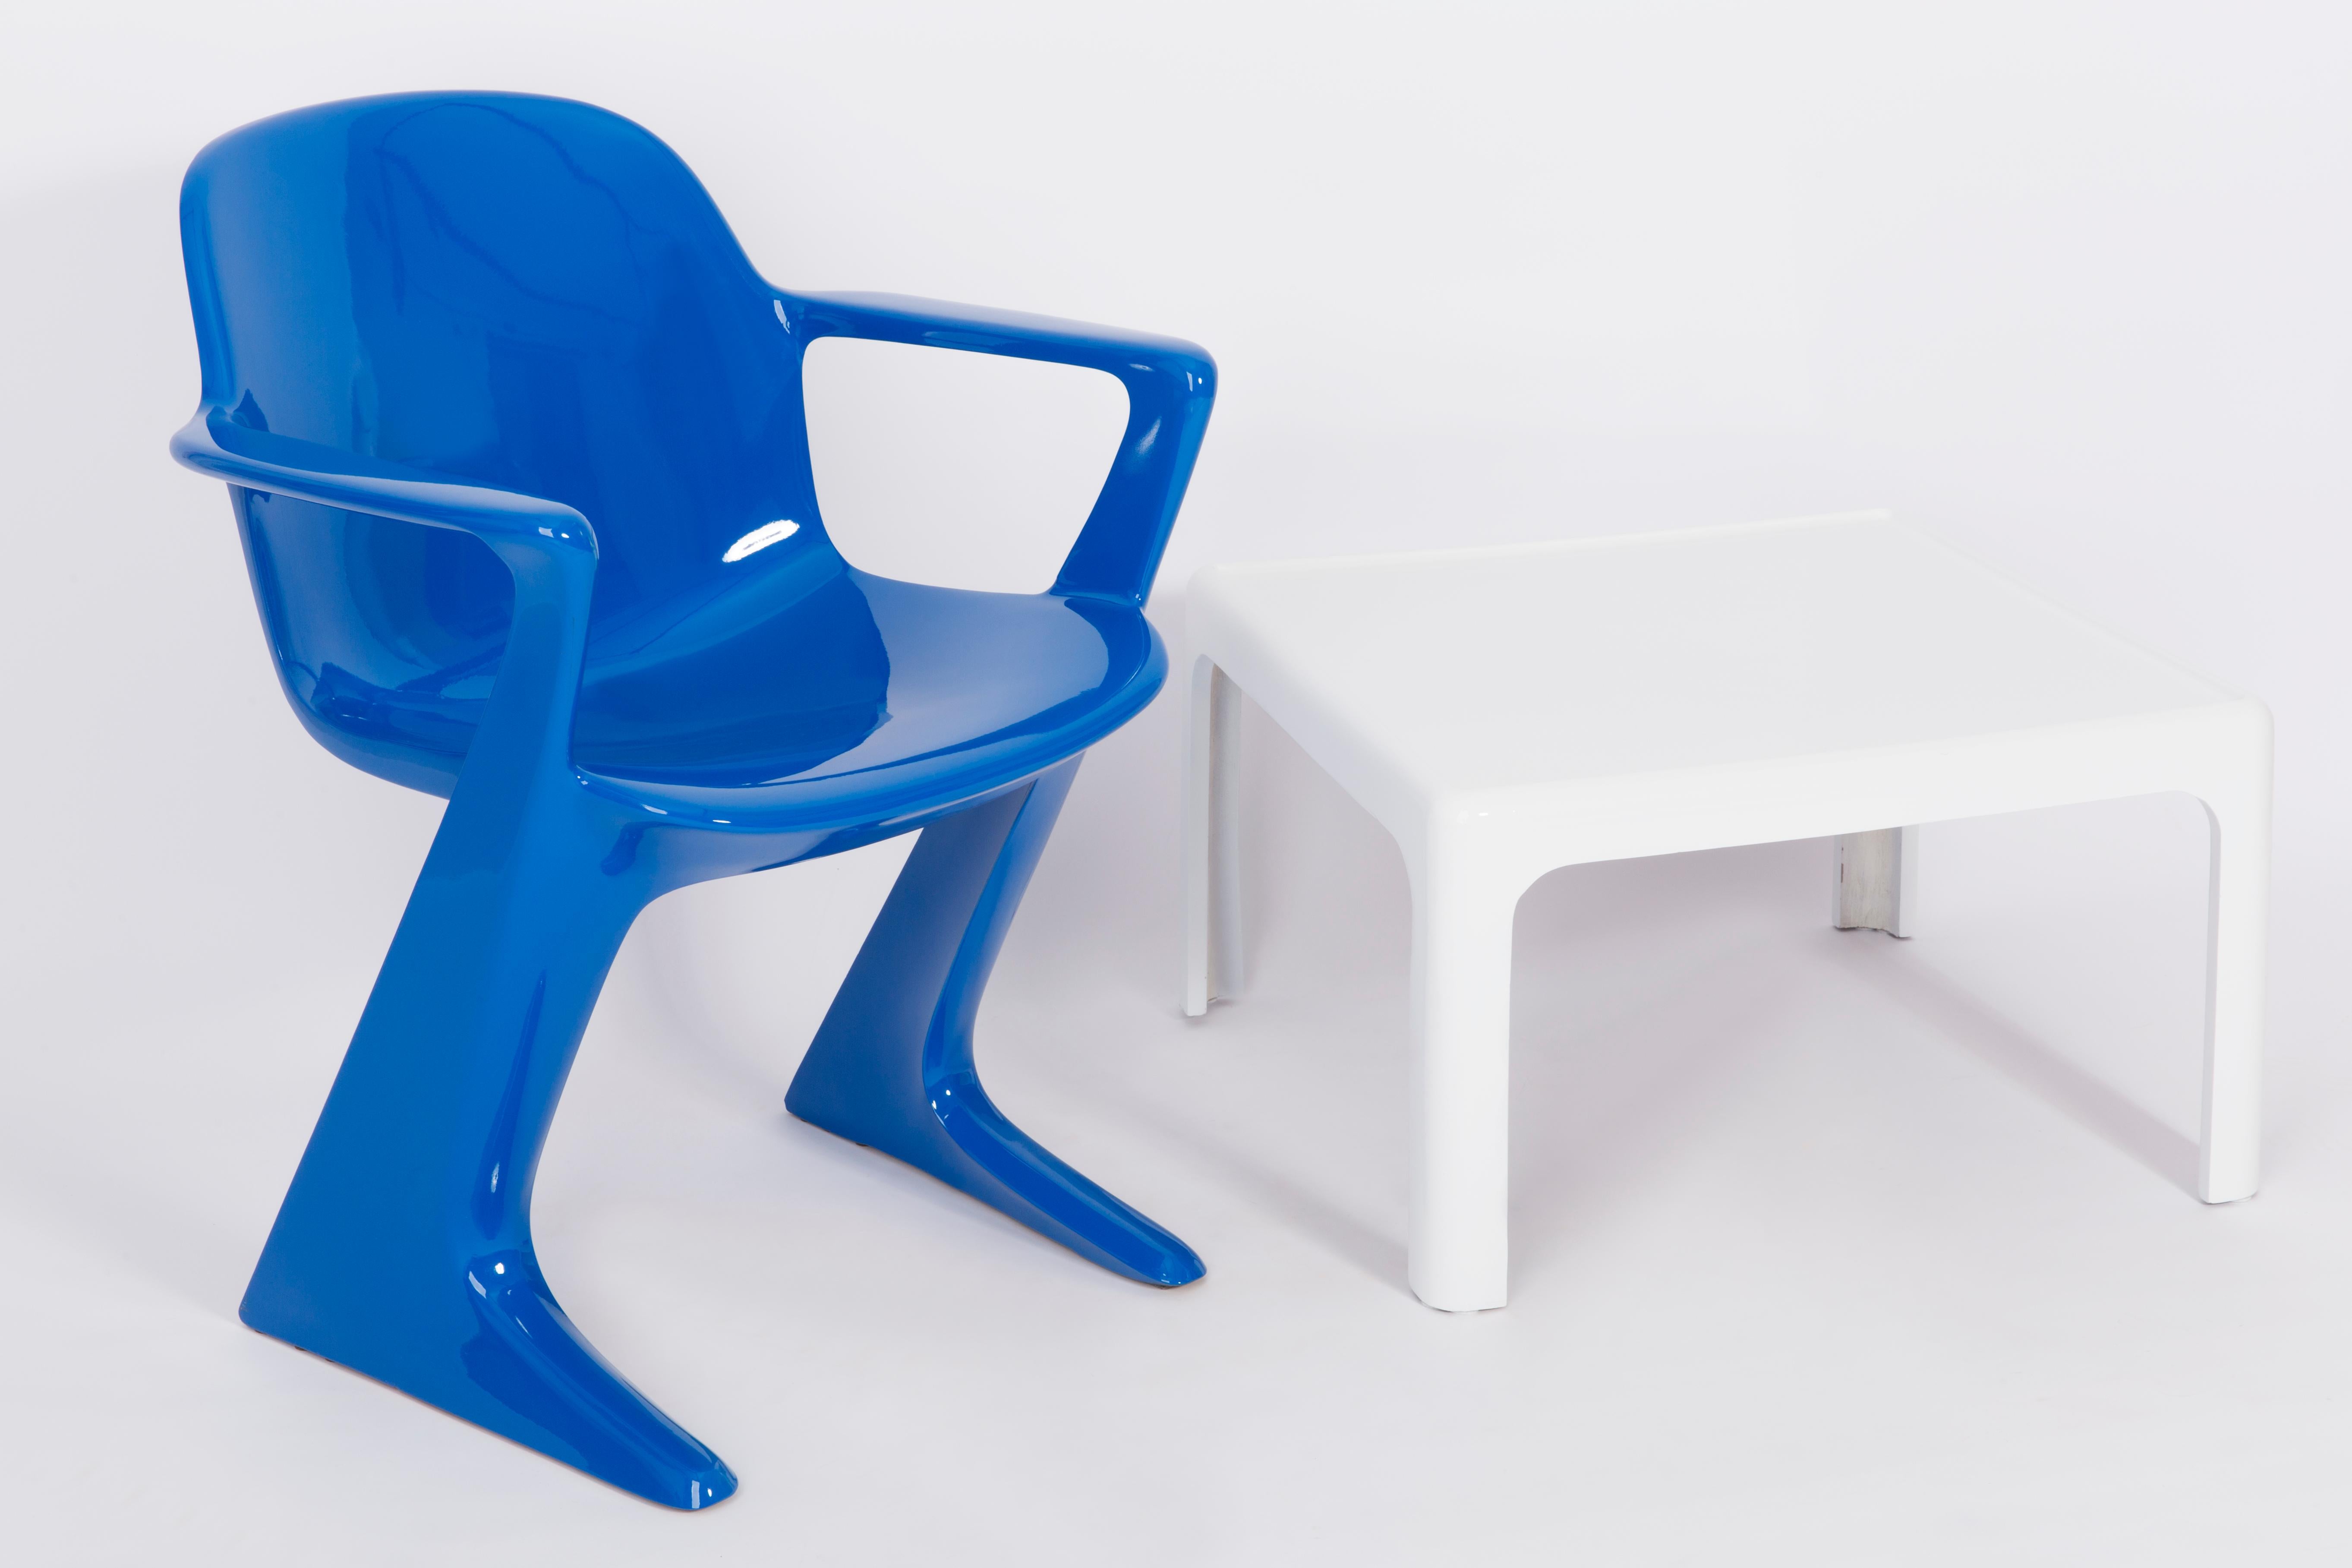 Set of Two Classic Blue Kangaroo Chairs Designed by Ernst Moeckl, Germany, 1968 For Sale 3